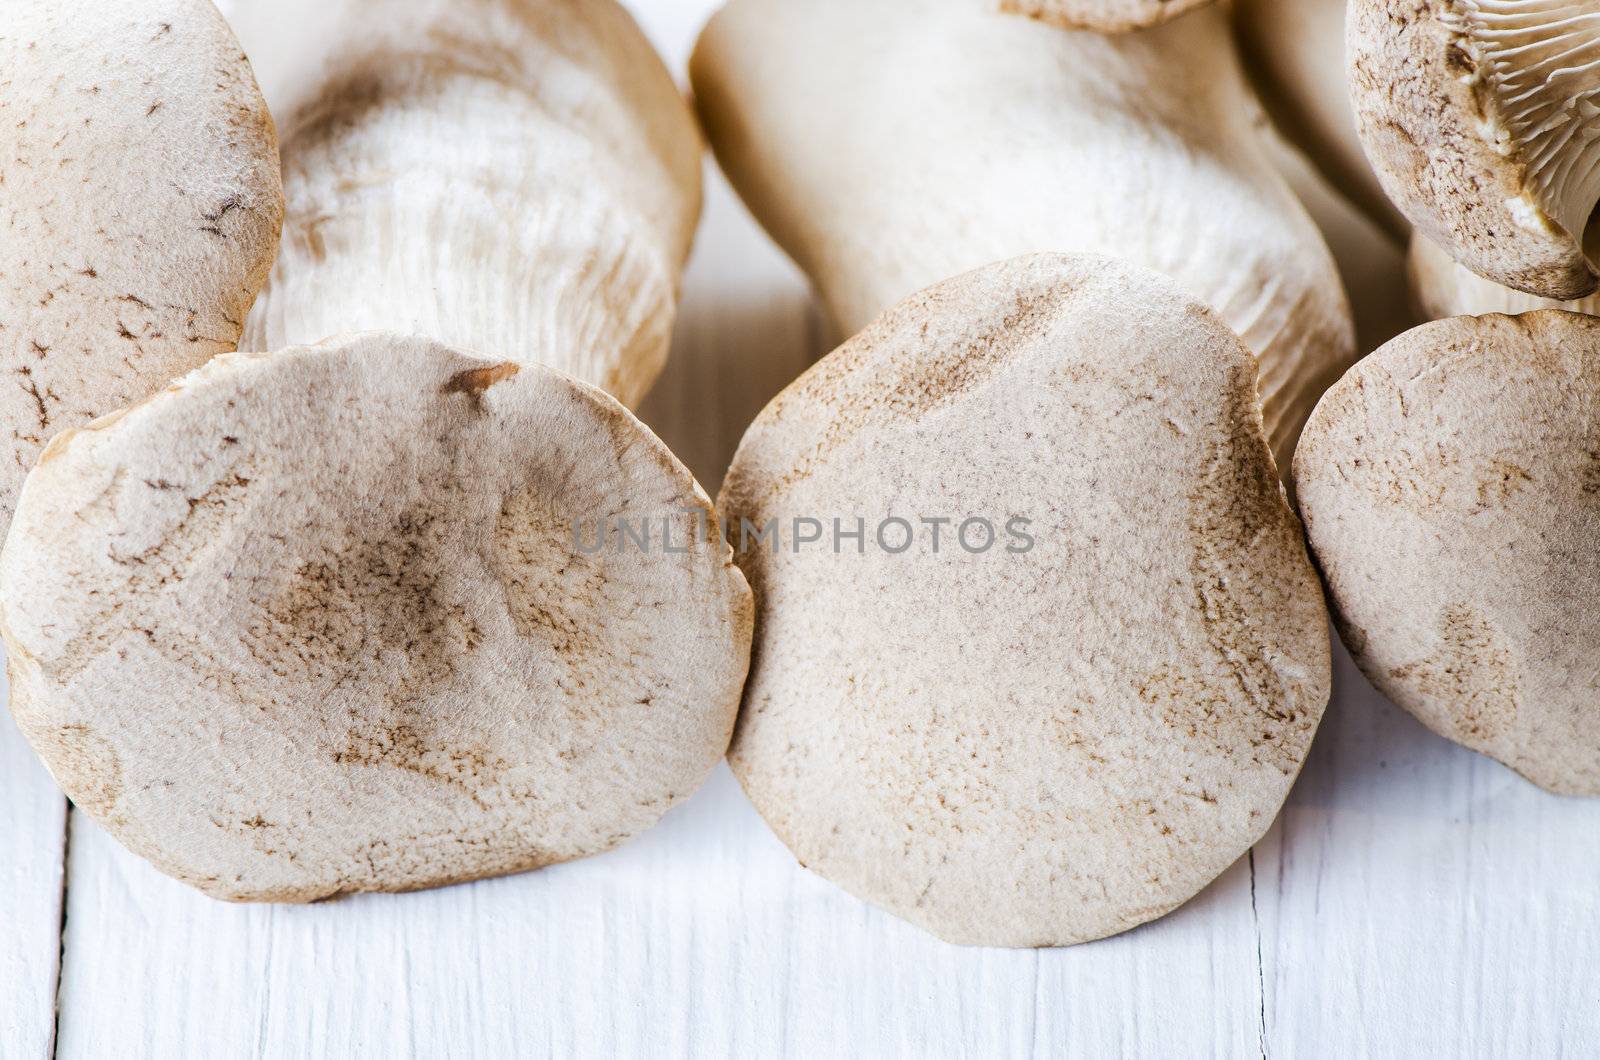 King oyster mushrooms on a white wooden table by Nanisimova